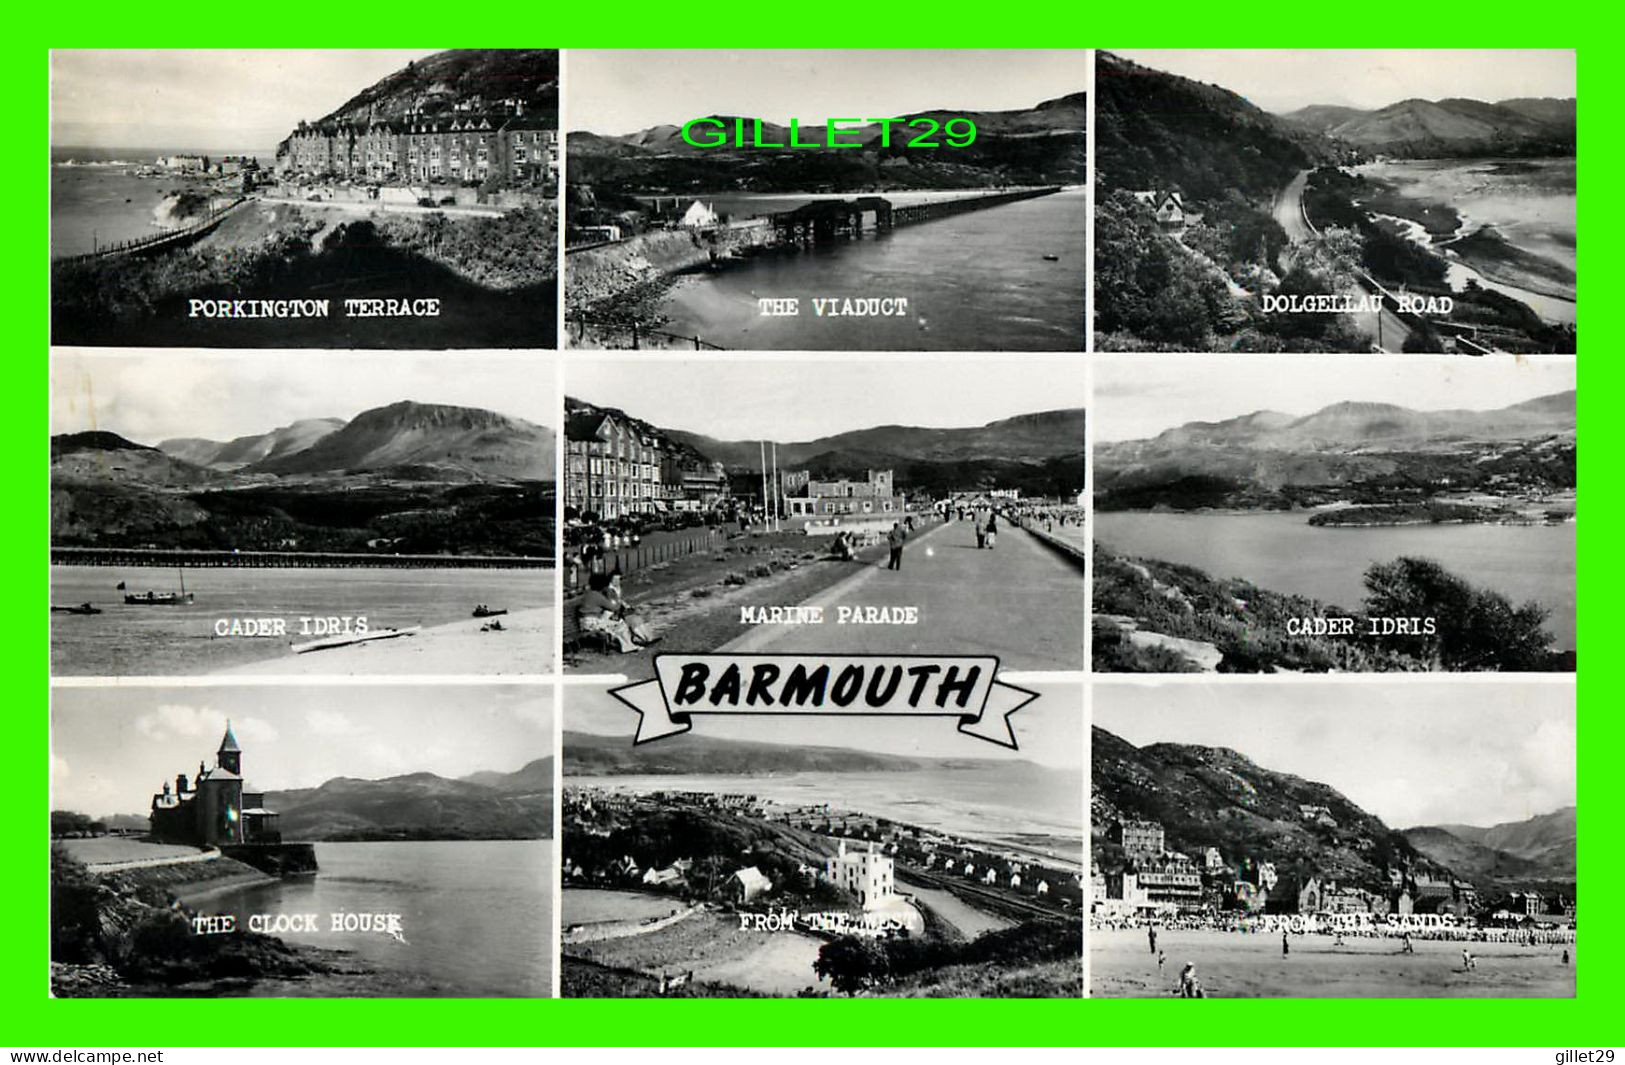 BARMOUTH, WALES - 10 MULTIVUES - SALMON SERIES - REAL PHOTO - - Merionethshire